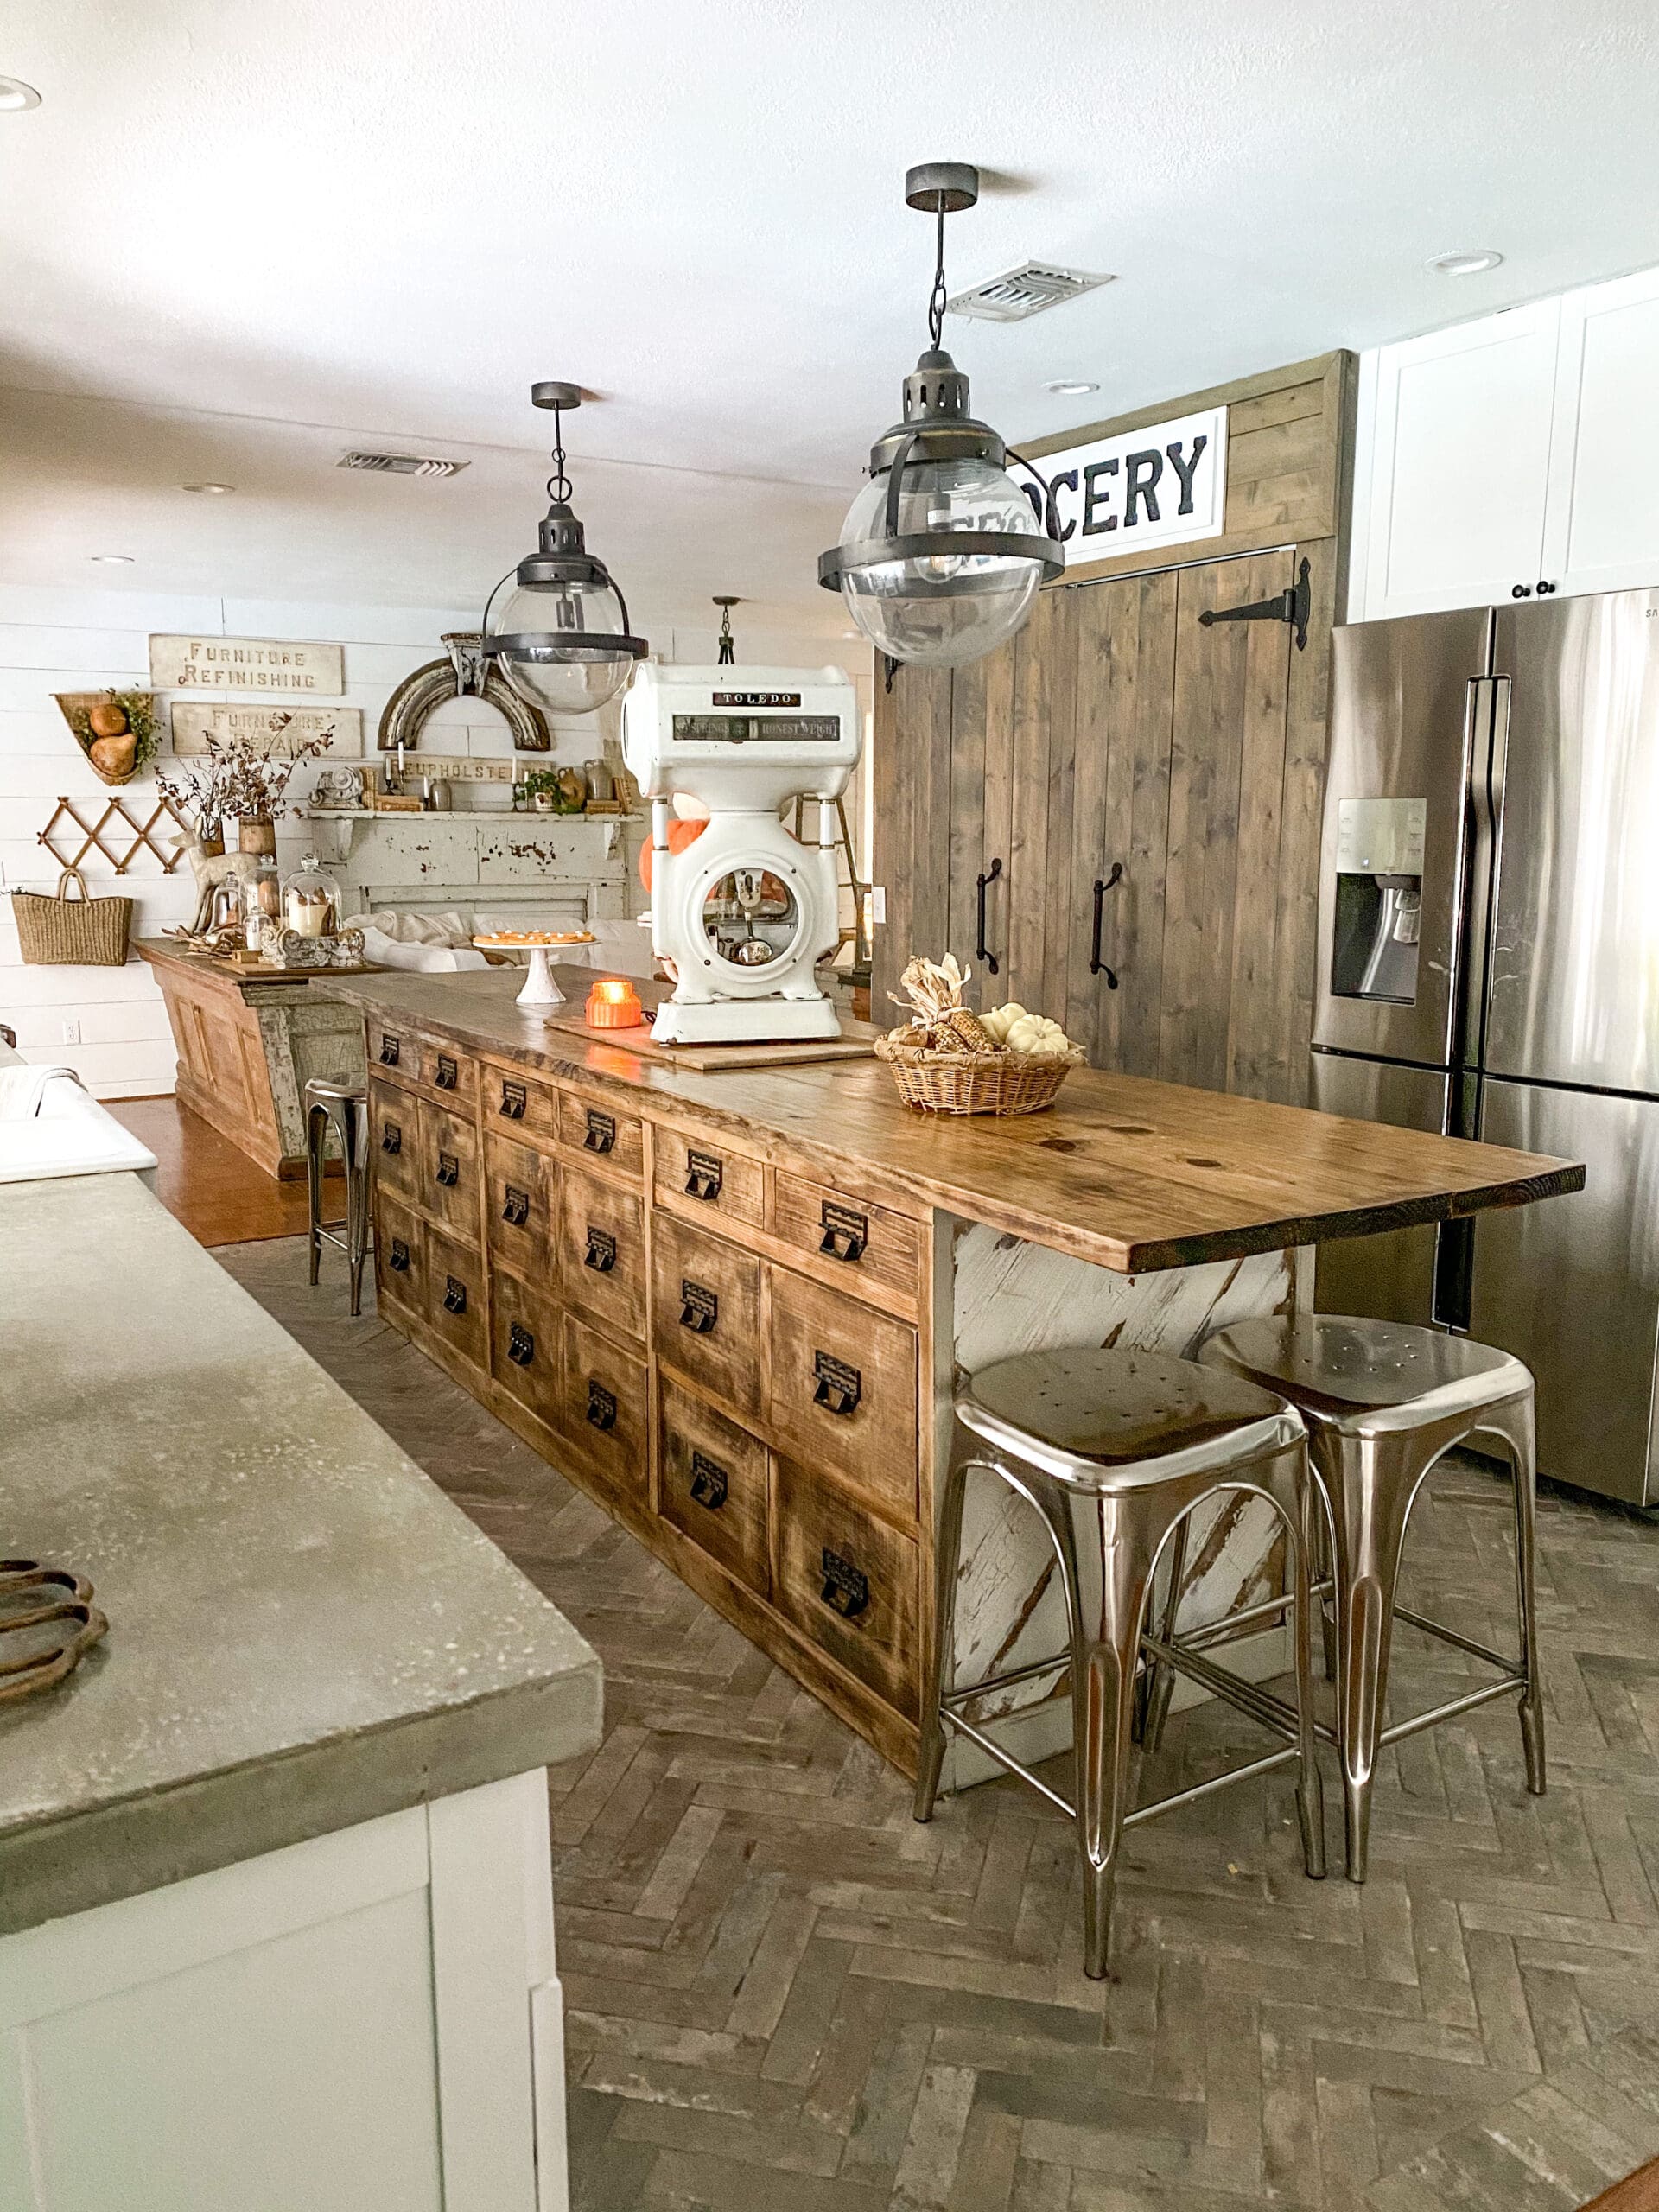 12 Fabulous Kitchen Island Ideas For Your Remodel